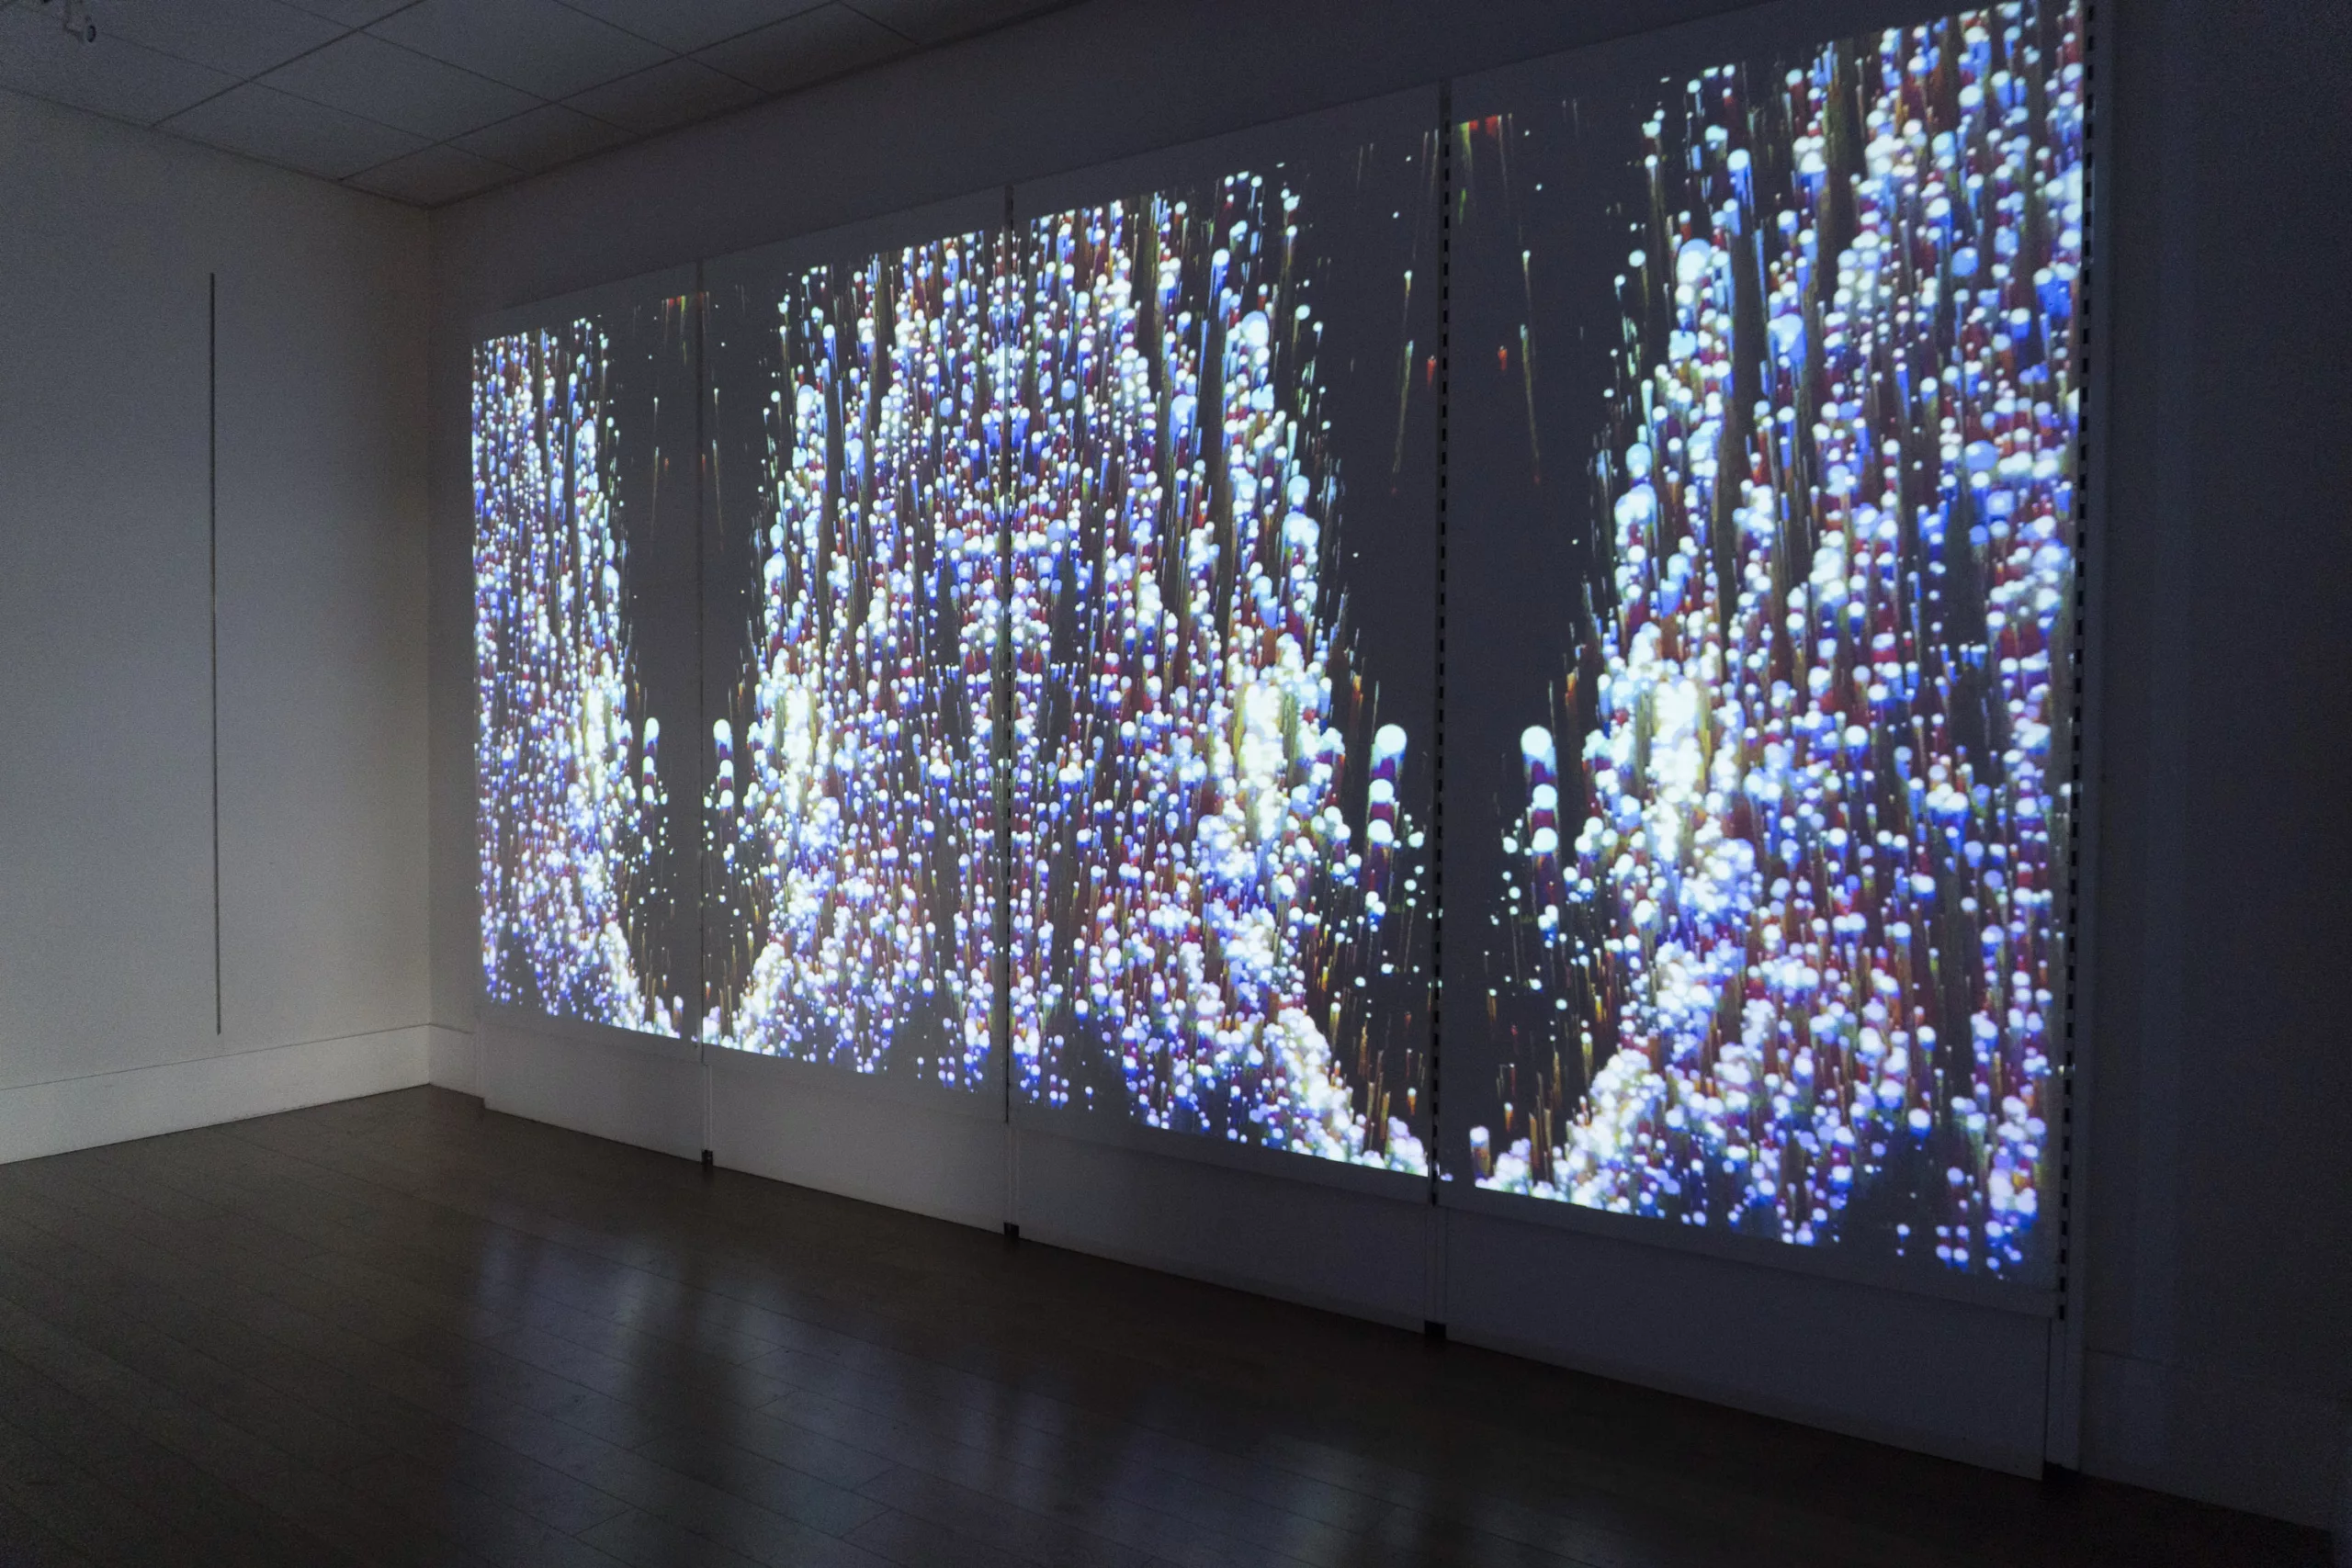 A video is projected onto a long wall. In the video, spherical balls of bright white, purple, and blue form patterns akin to waves of water.